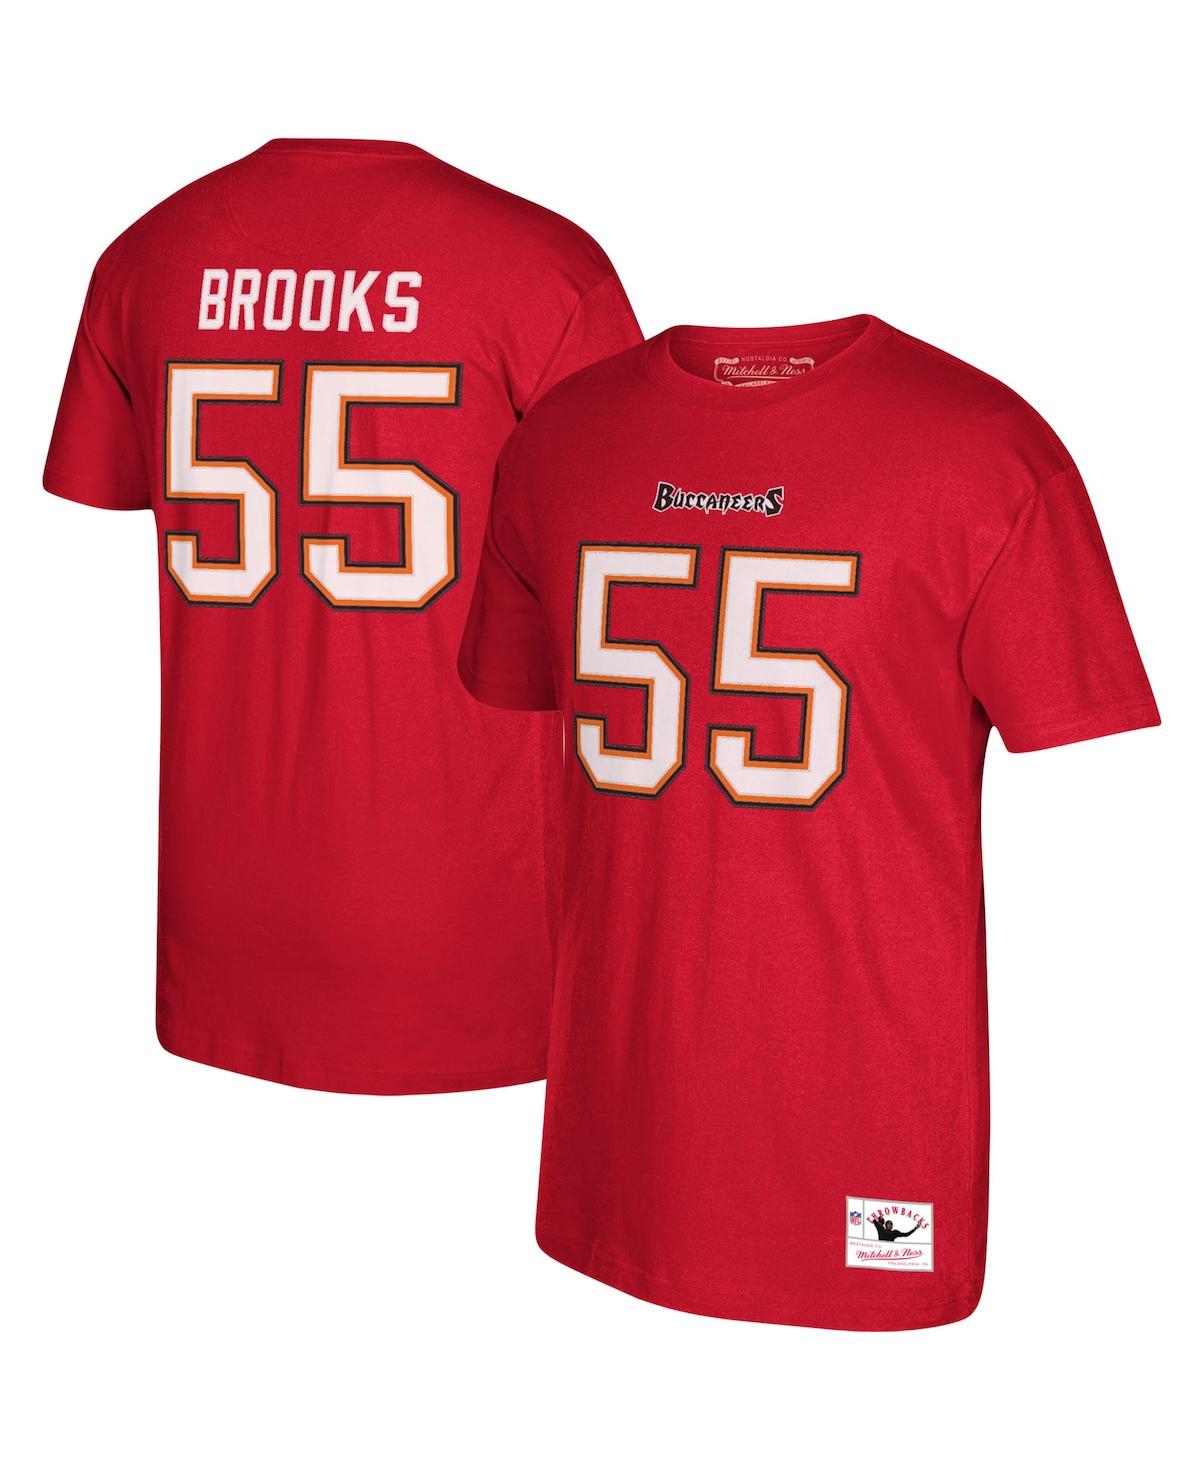 MITCHELL & NESS MEN'S MITCHELL & NESS DERRICK BROOKS RED TAMPA BAY BUCCANEERS RETIRED PLAYER LOGO NAME AND NUMBER T-